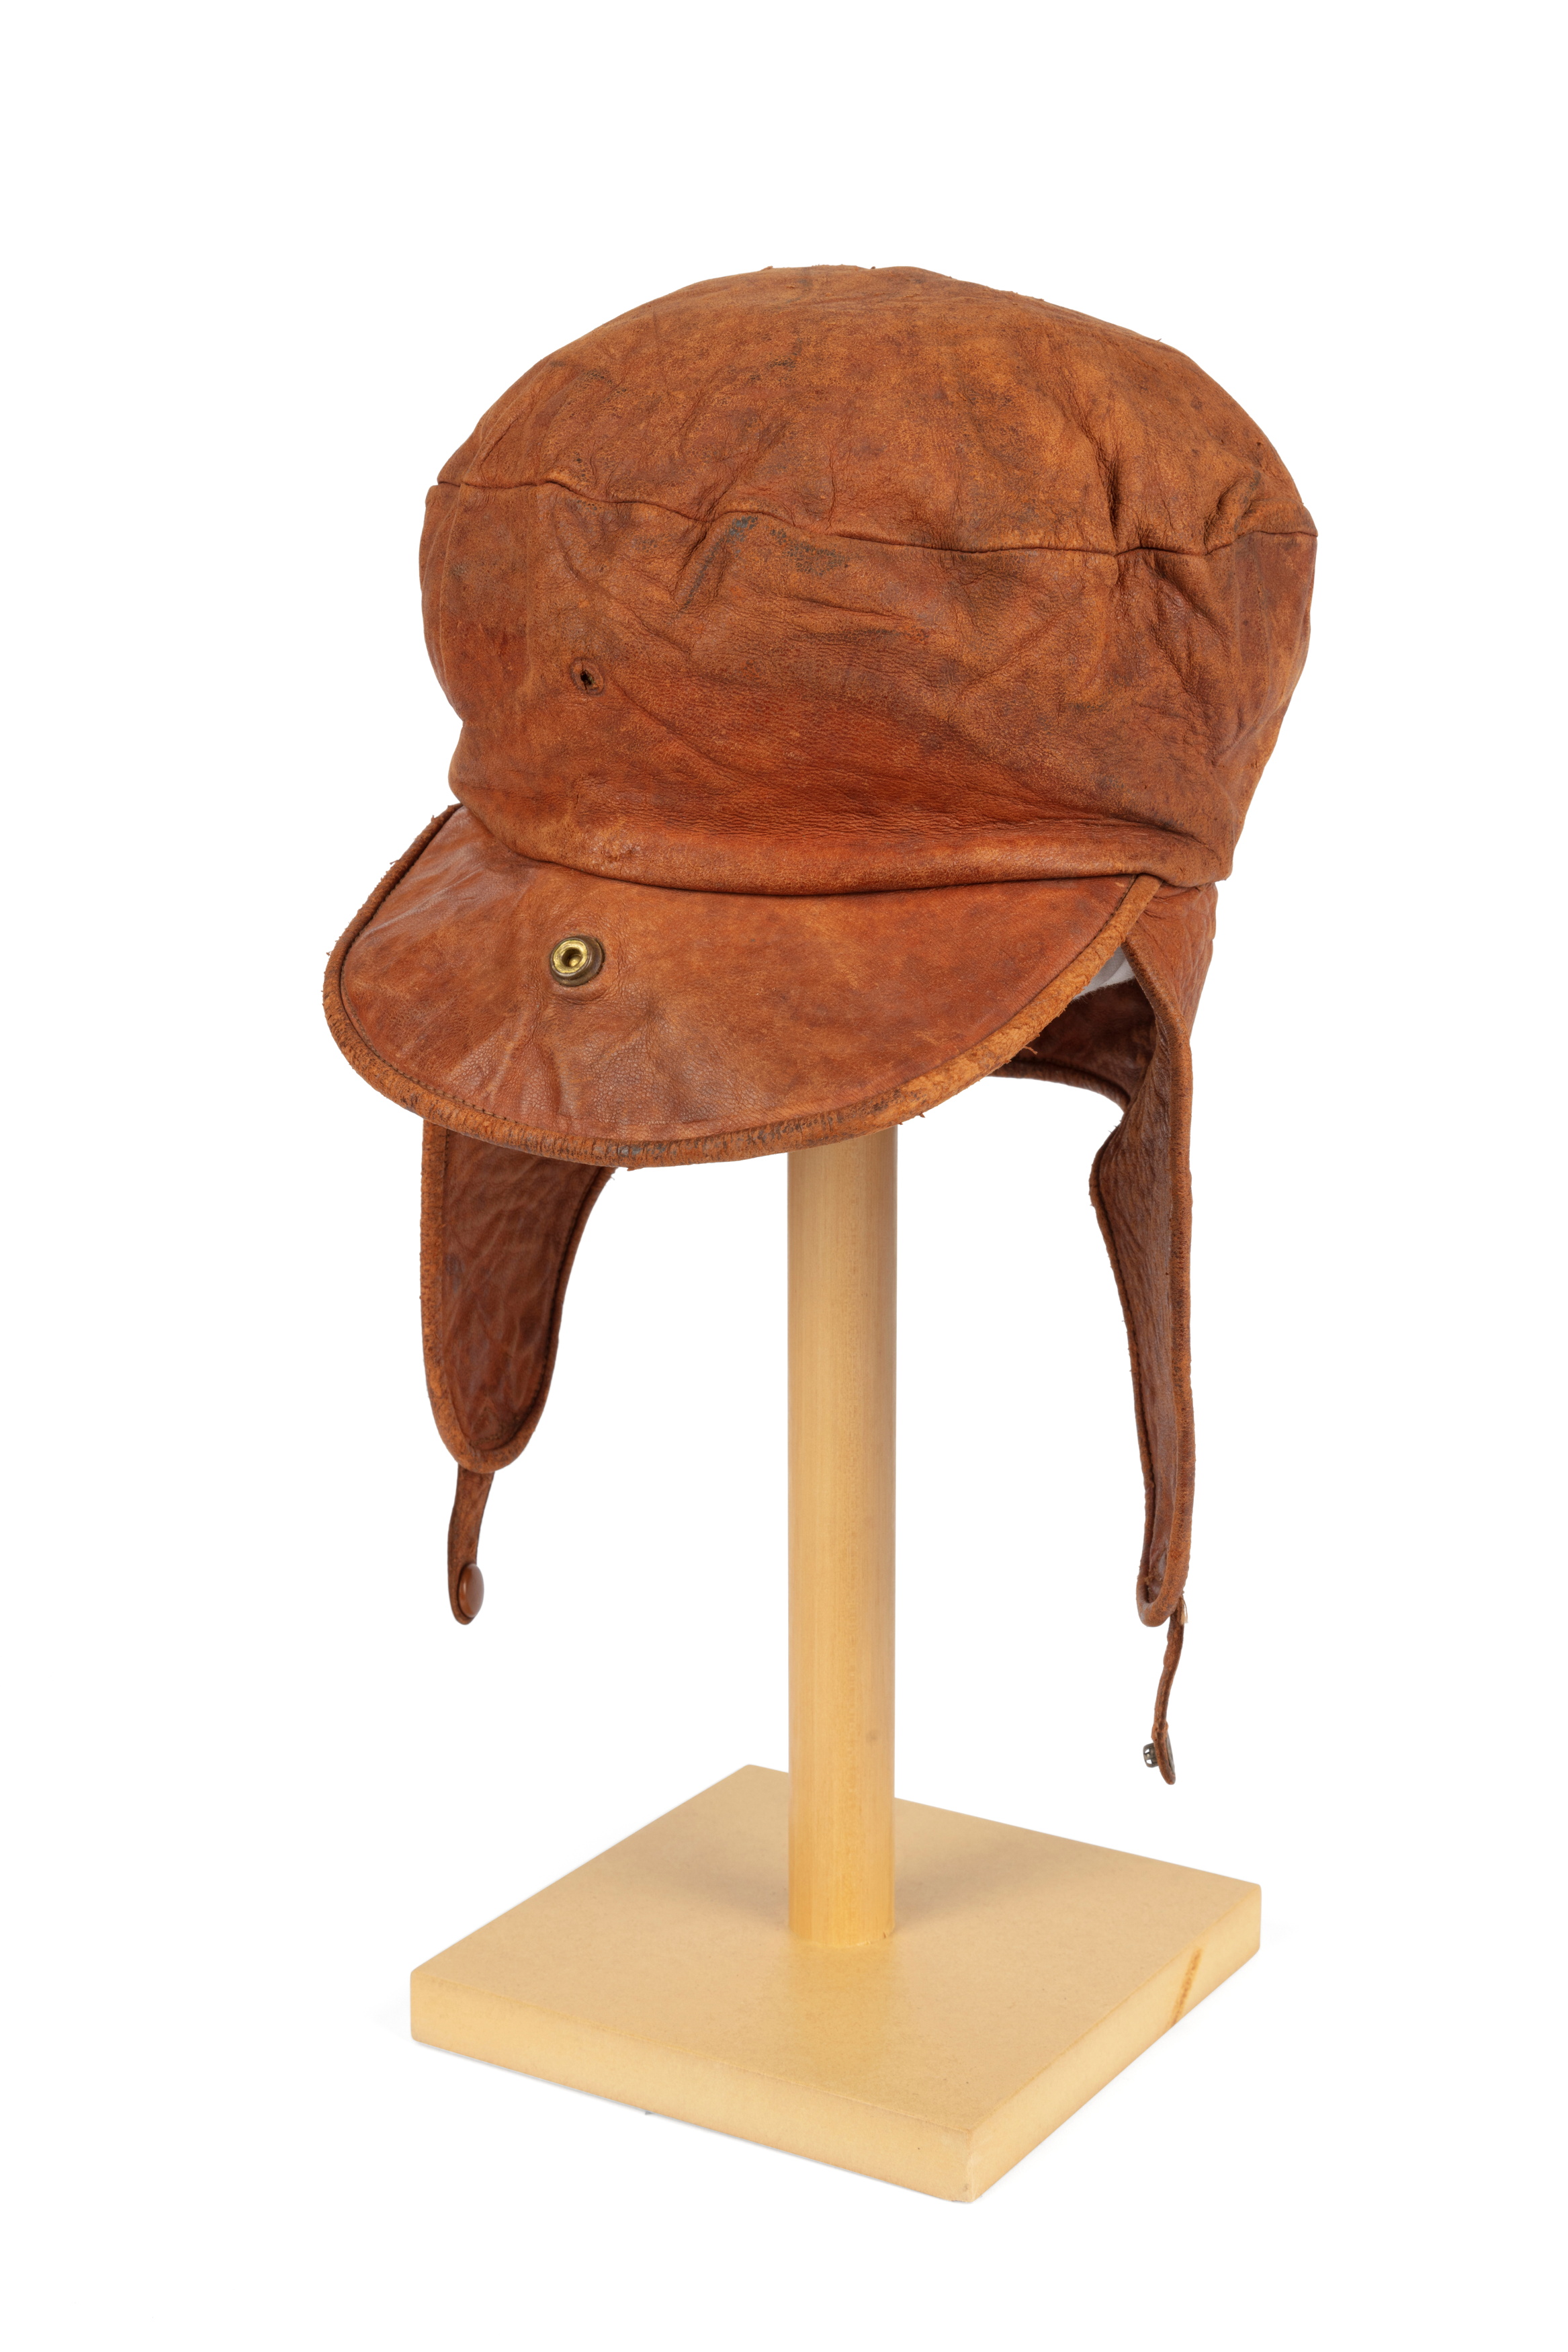 Aviator flying cap worn by Millicent Bryant